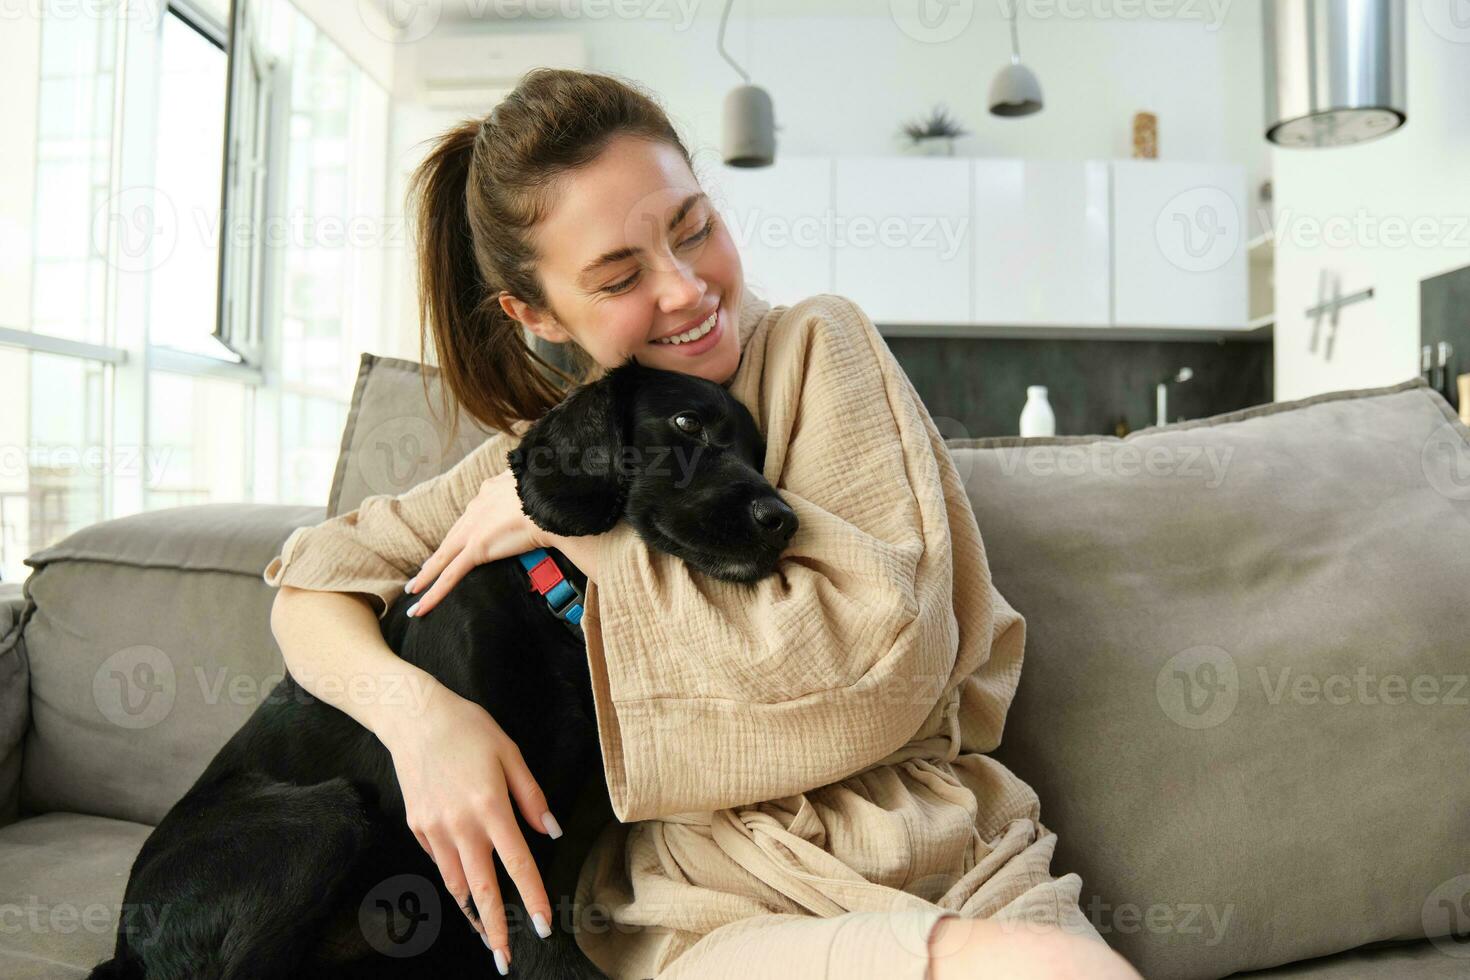 Animals and lifestyle concept. Happy young woman in bathrobe, hugs her dog on sofa, cuddle puppy and smiling photo